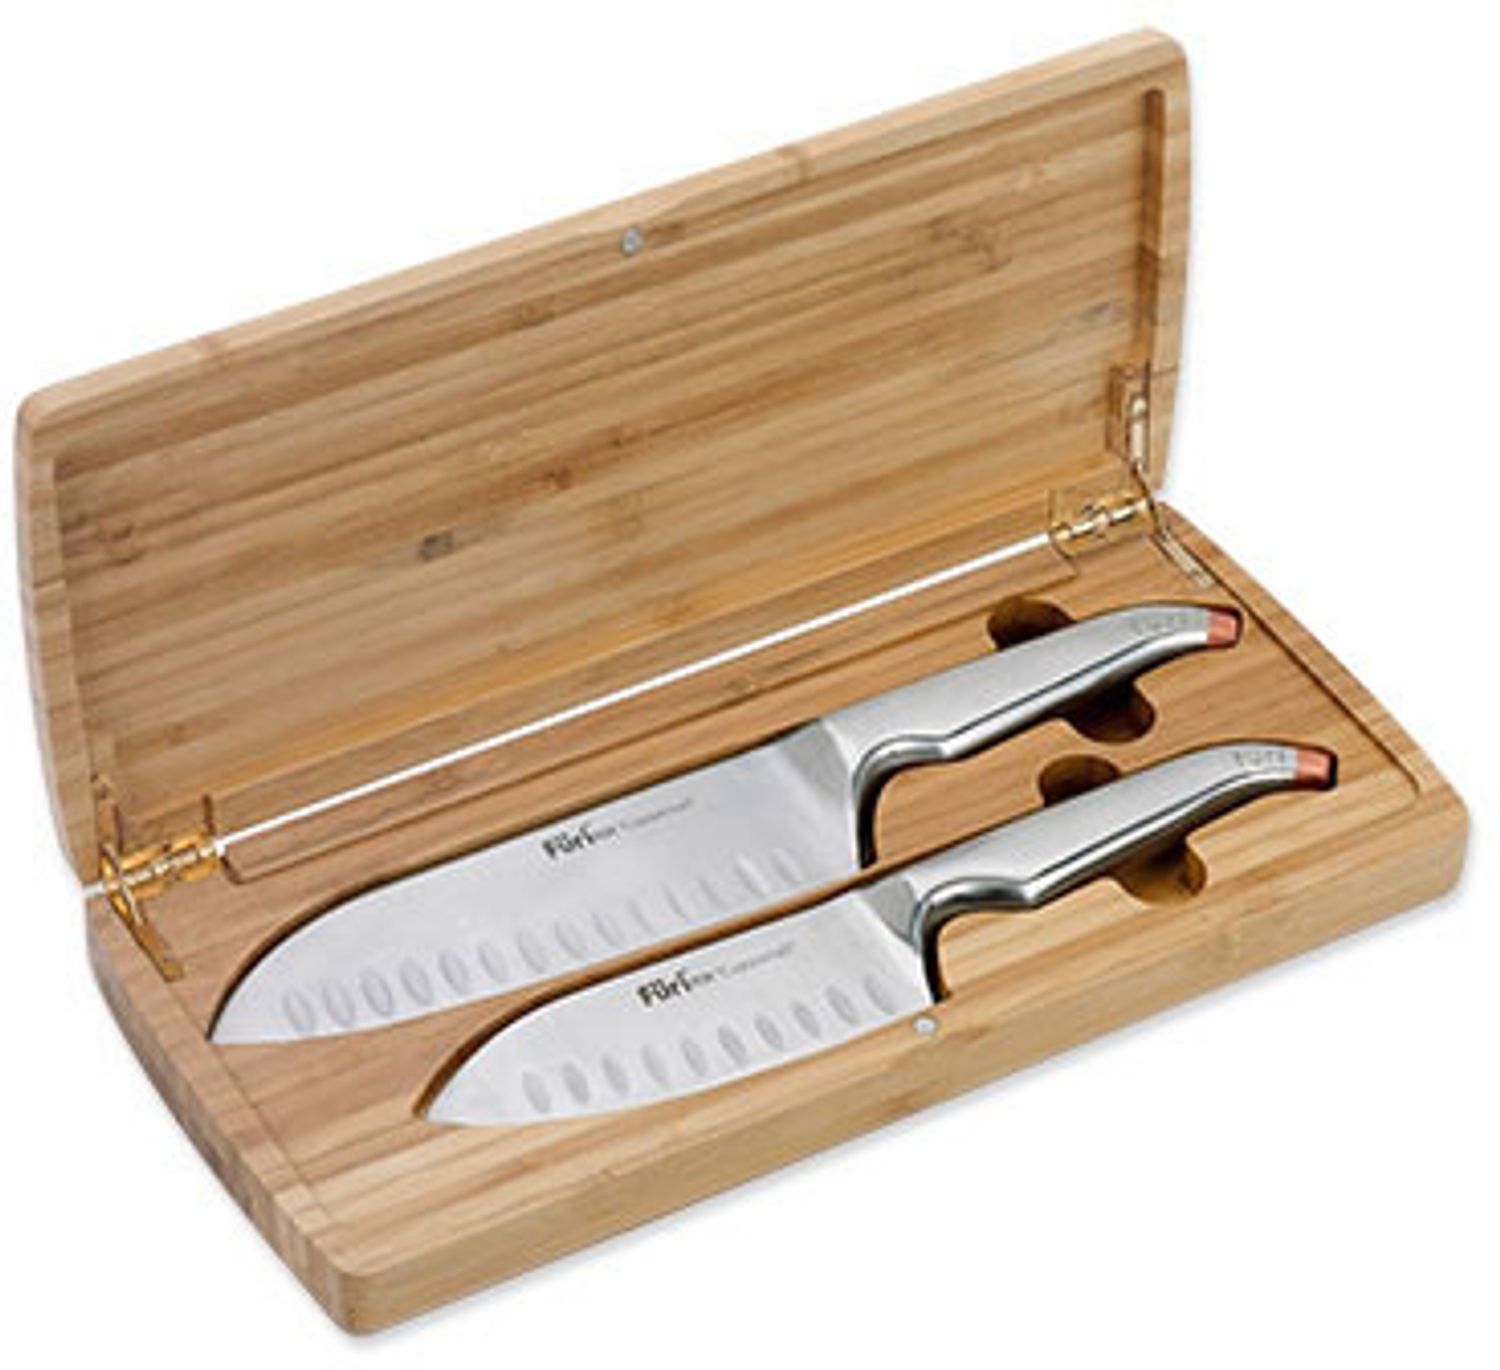 Furi Rachael Ray Coppertail 2 Piece Cutlery Set with Bamboo Case